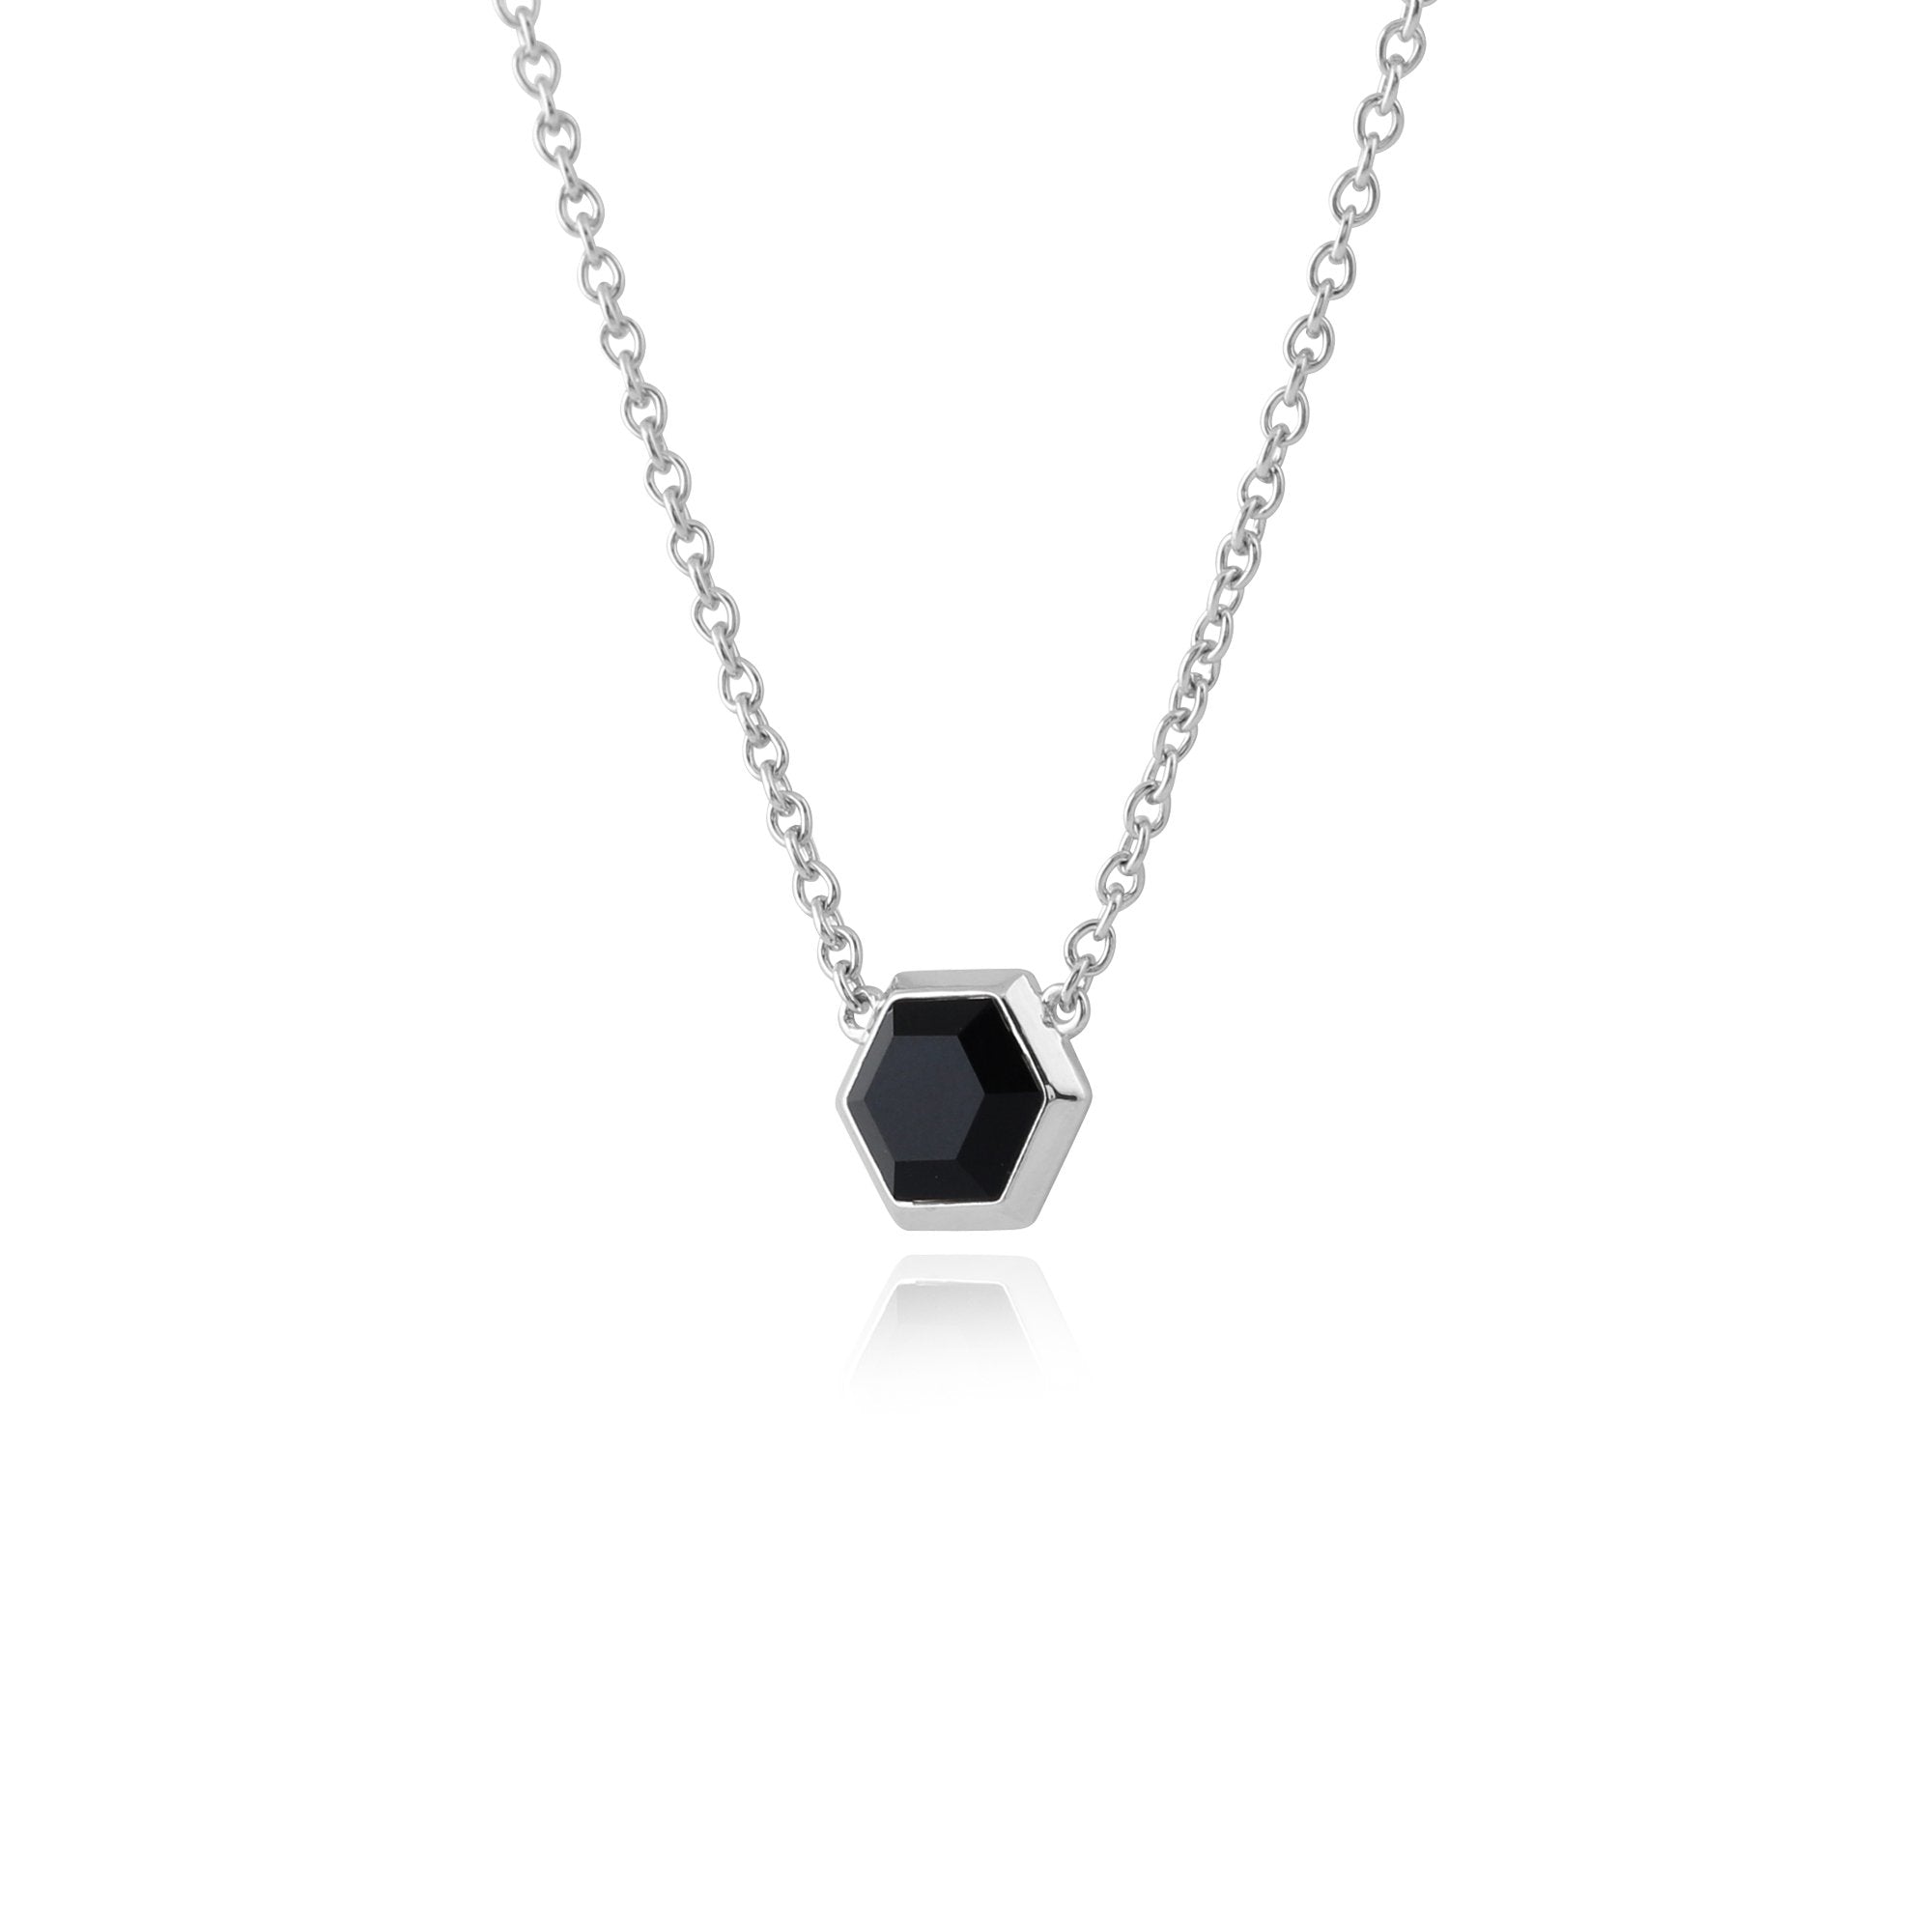 Geometric Hexagon Black Onyx Necklace in 925 Sterling Silver